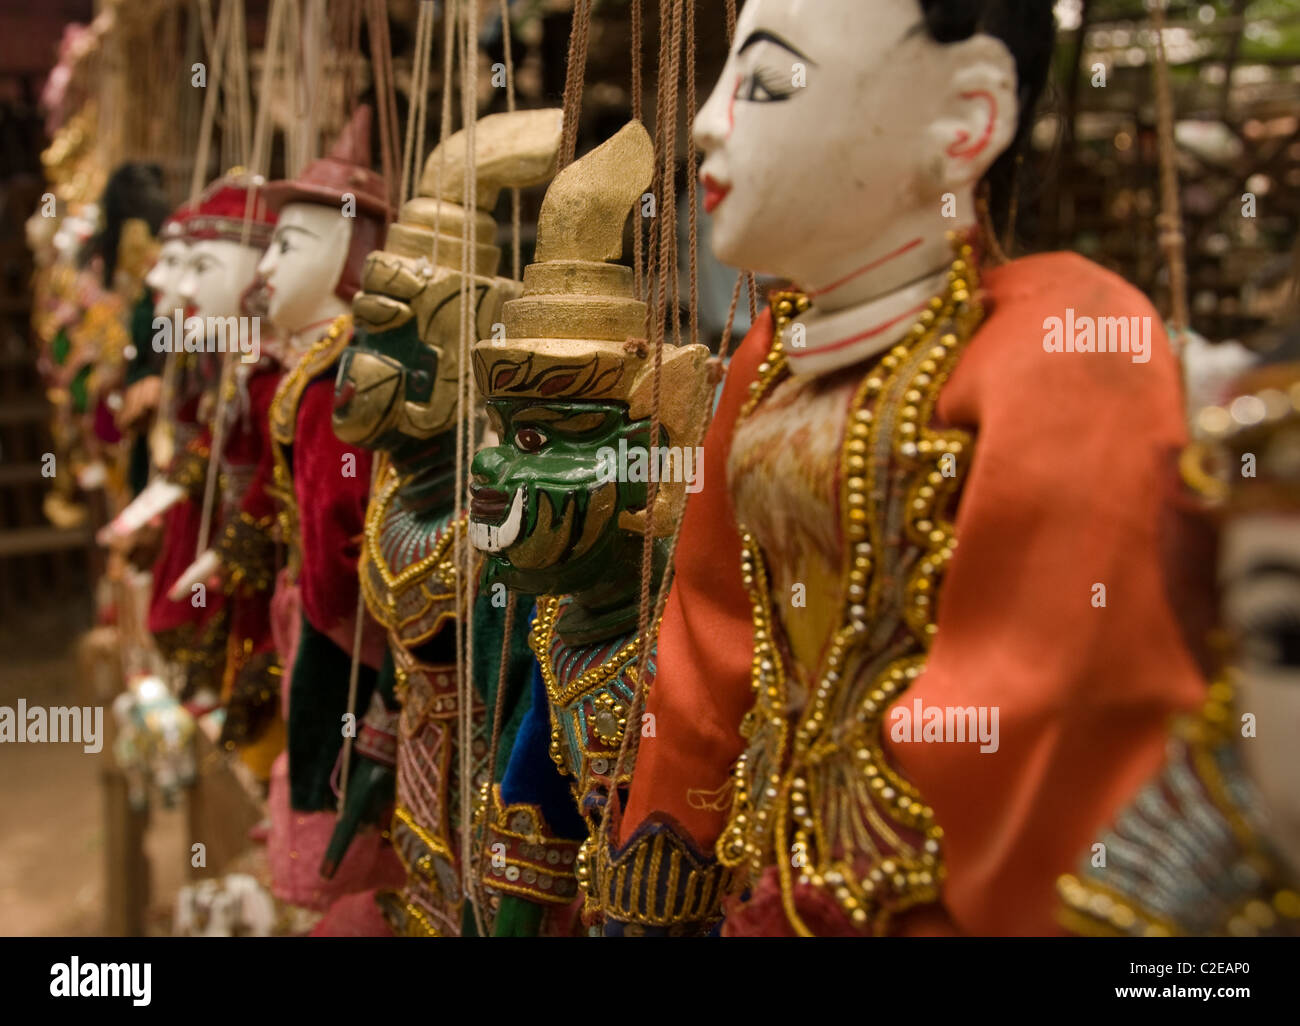 Pyay, Burma - Traditional Burmese puppets, for sale in the town street market Stock Photo